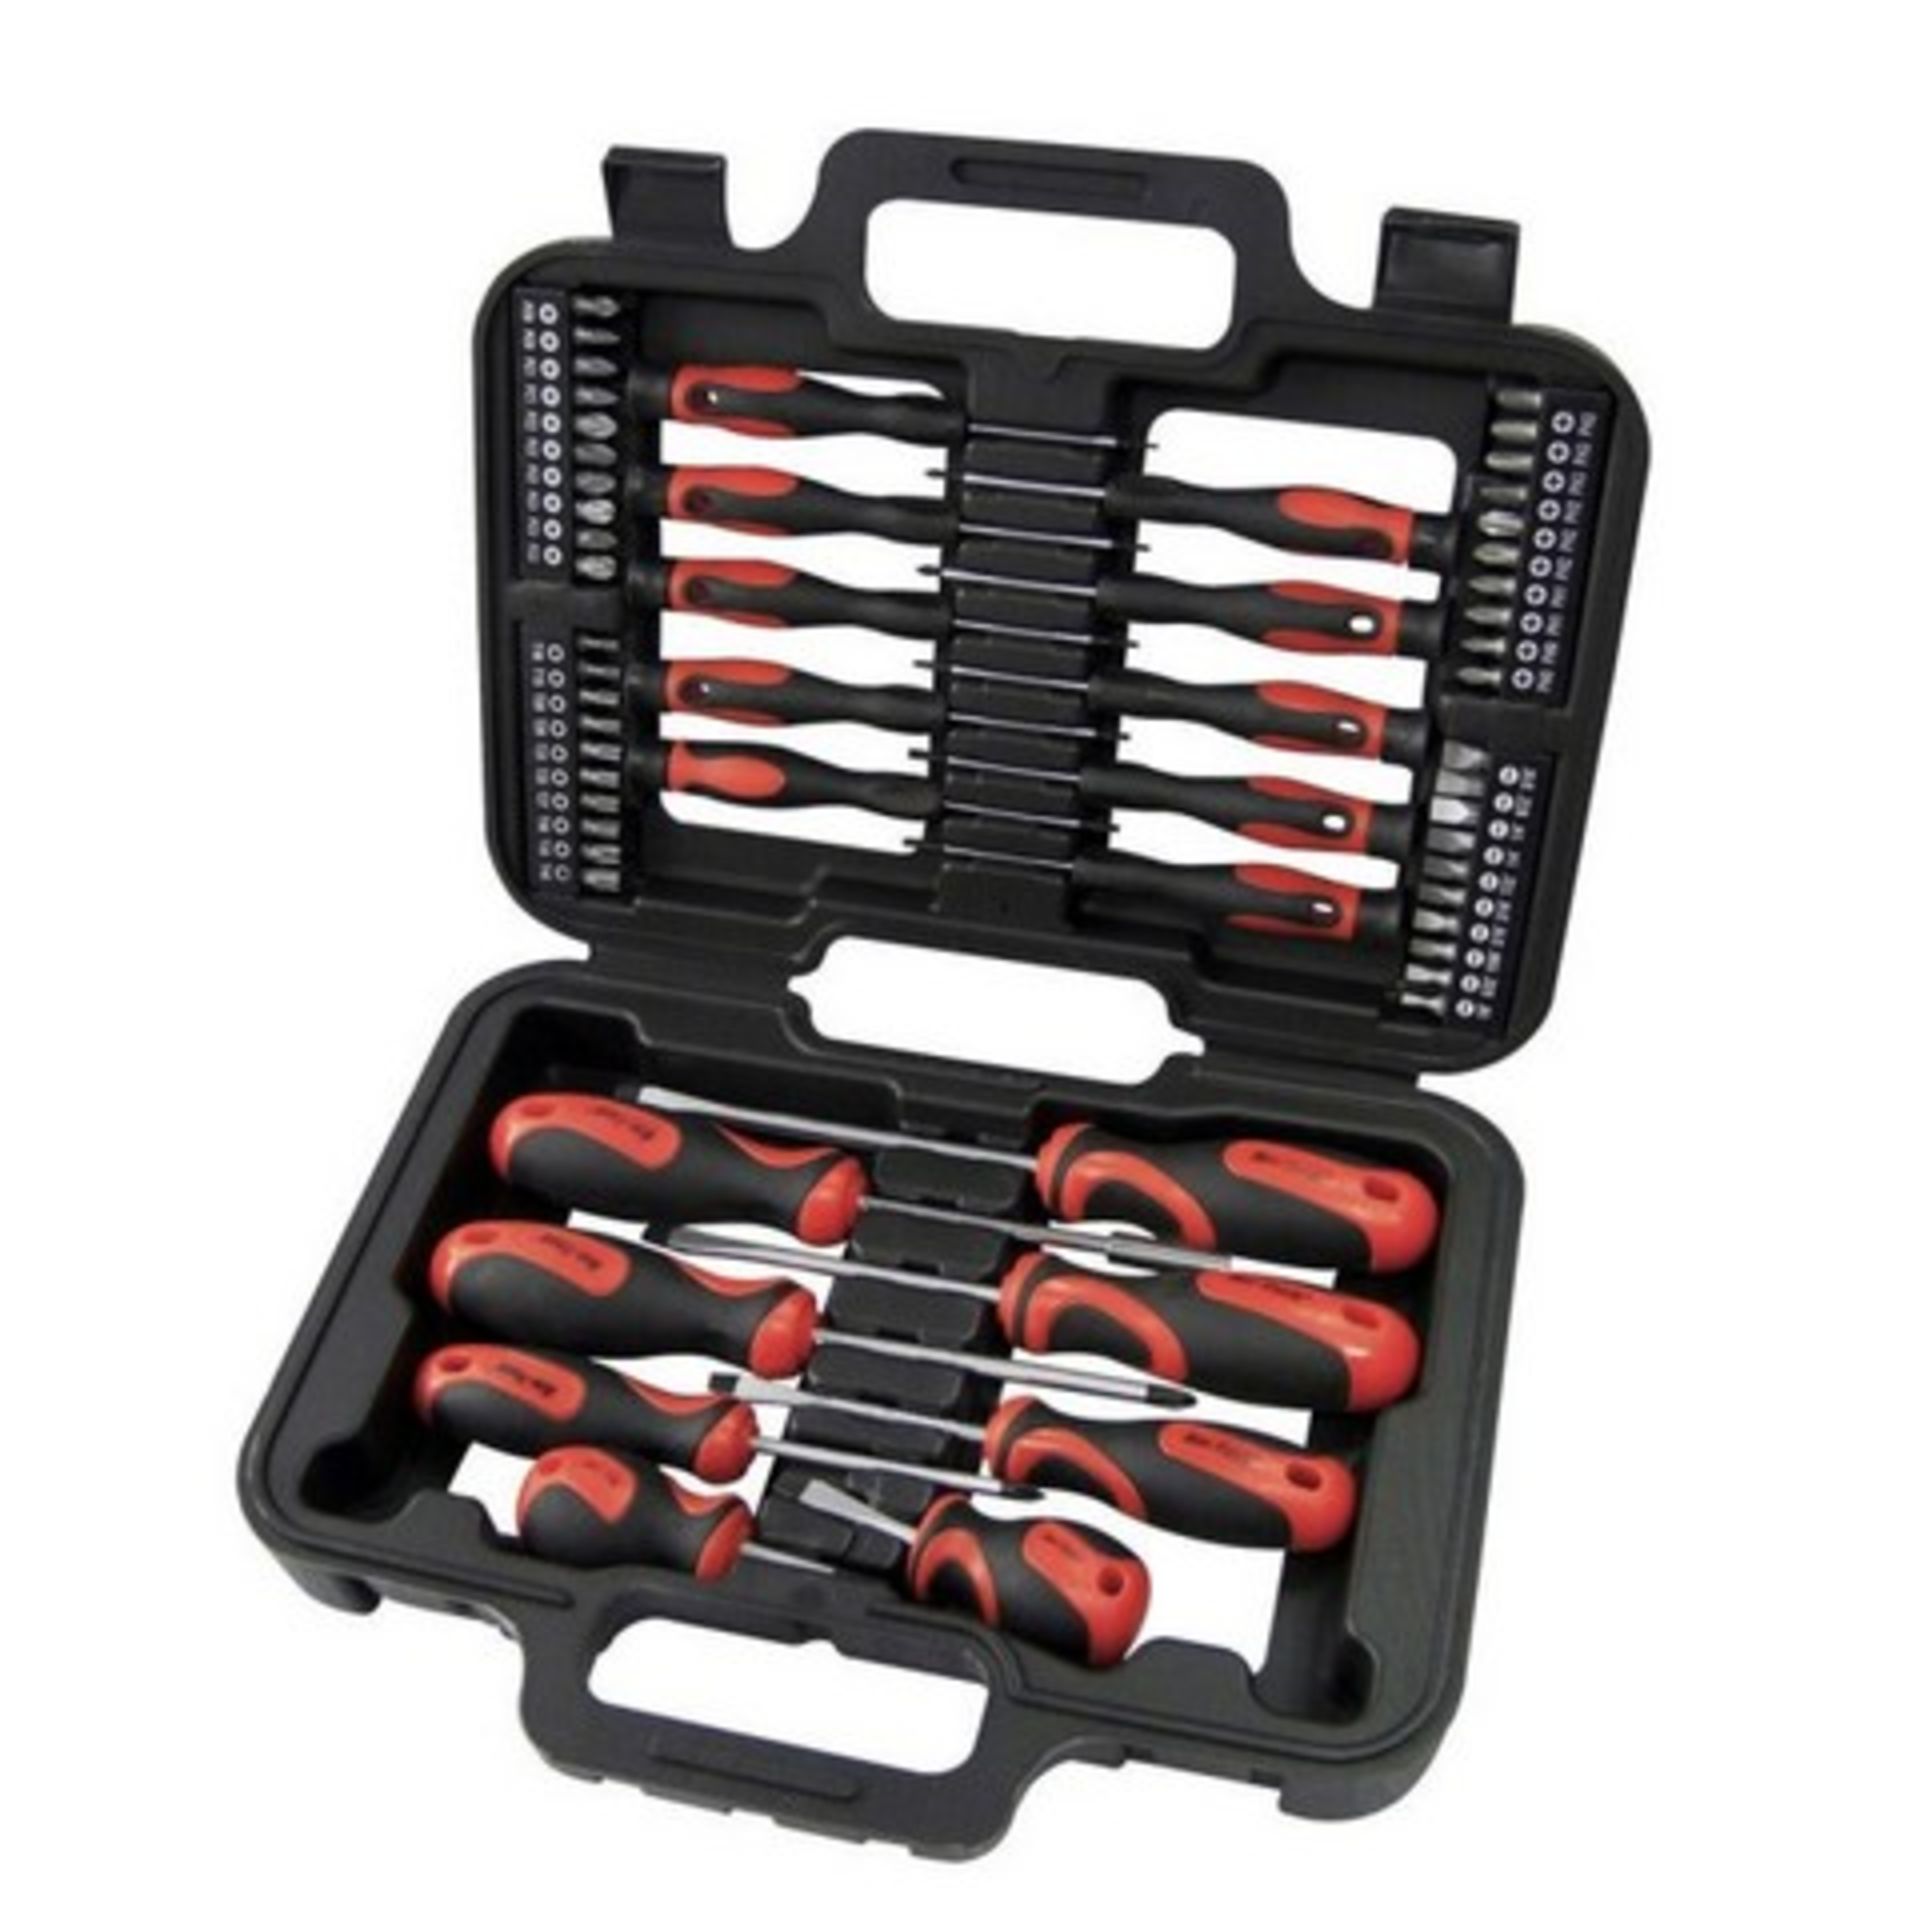 + VAT Brand New 58 Piece Screwdriver And Bit Set In Carry Case